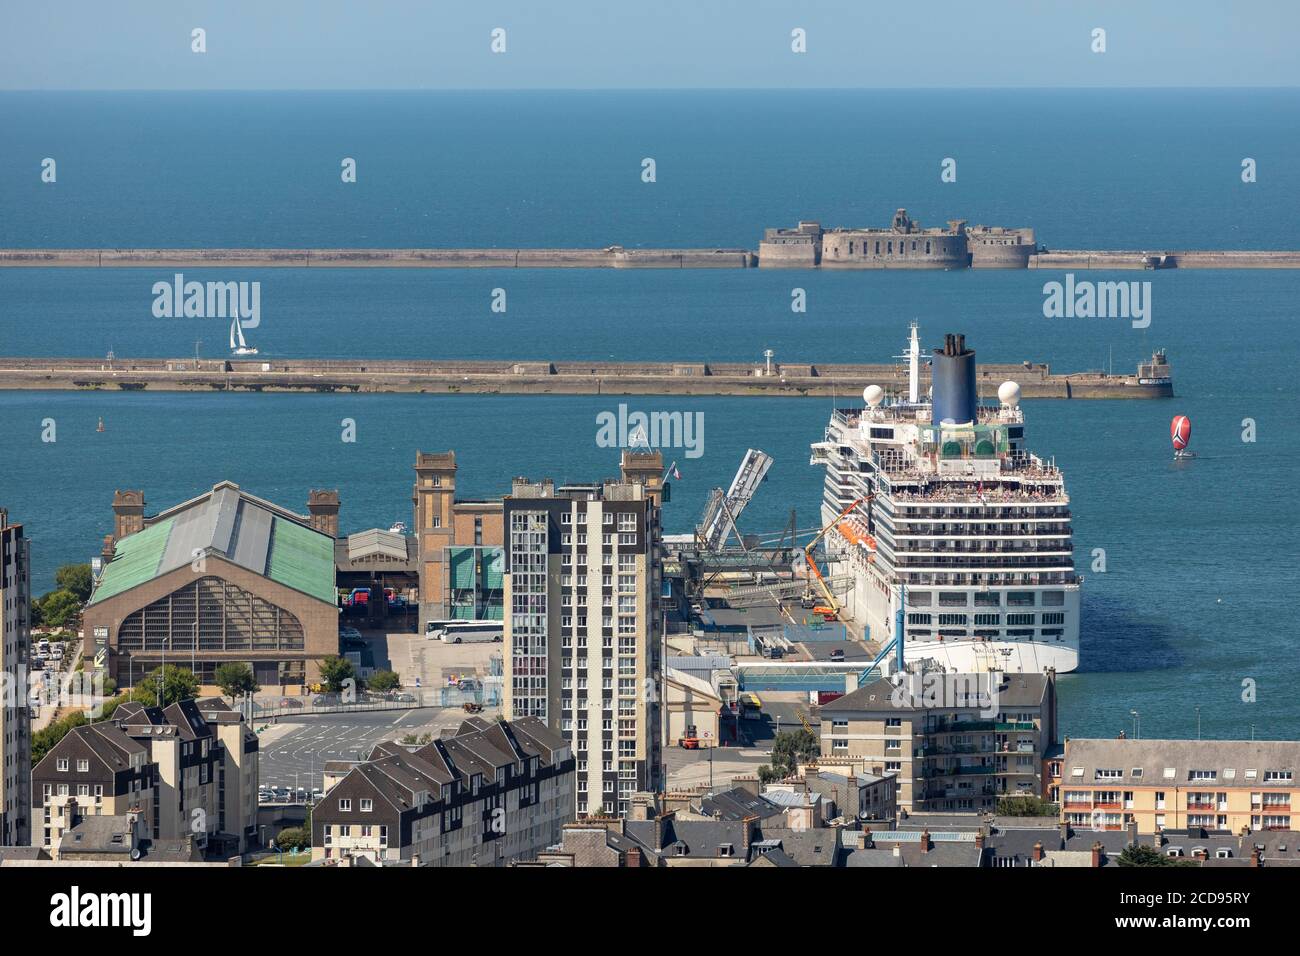 France, Manche, Cherbourg, elevated Cherbourg city view from the Fort du Roule, Cherbourg transatlantic ferry terminal and Arcadia liner docked (Central Fort in the background) Stock Photo